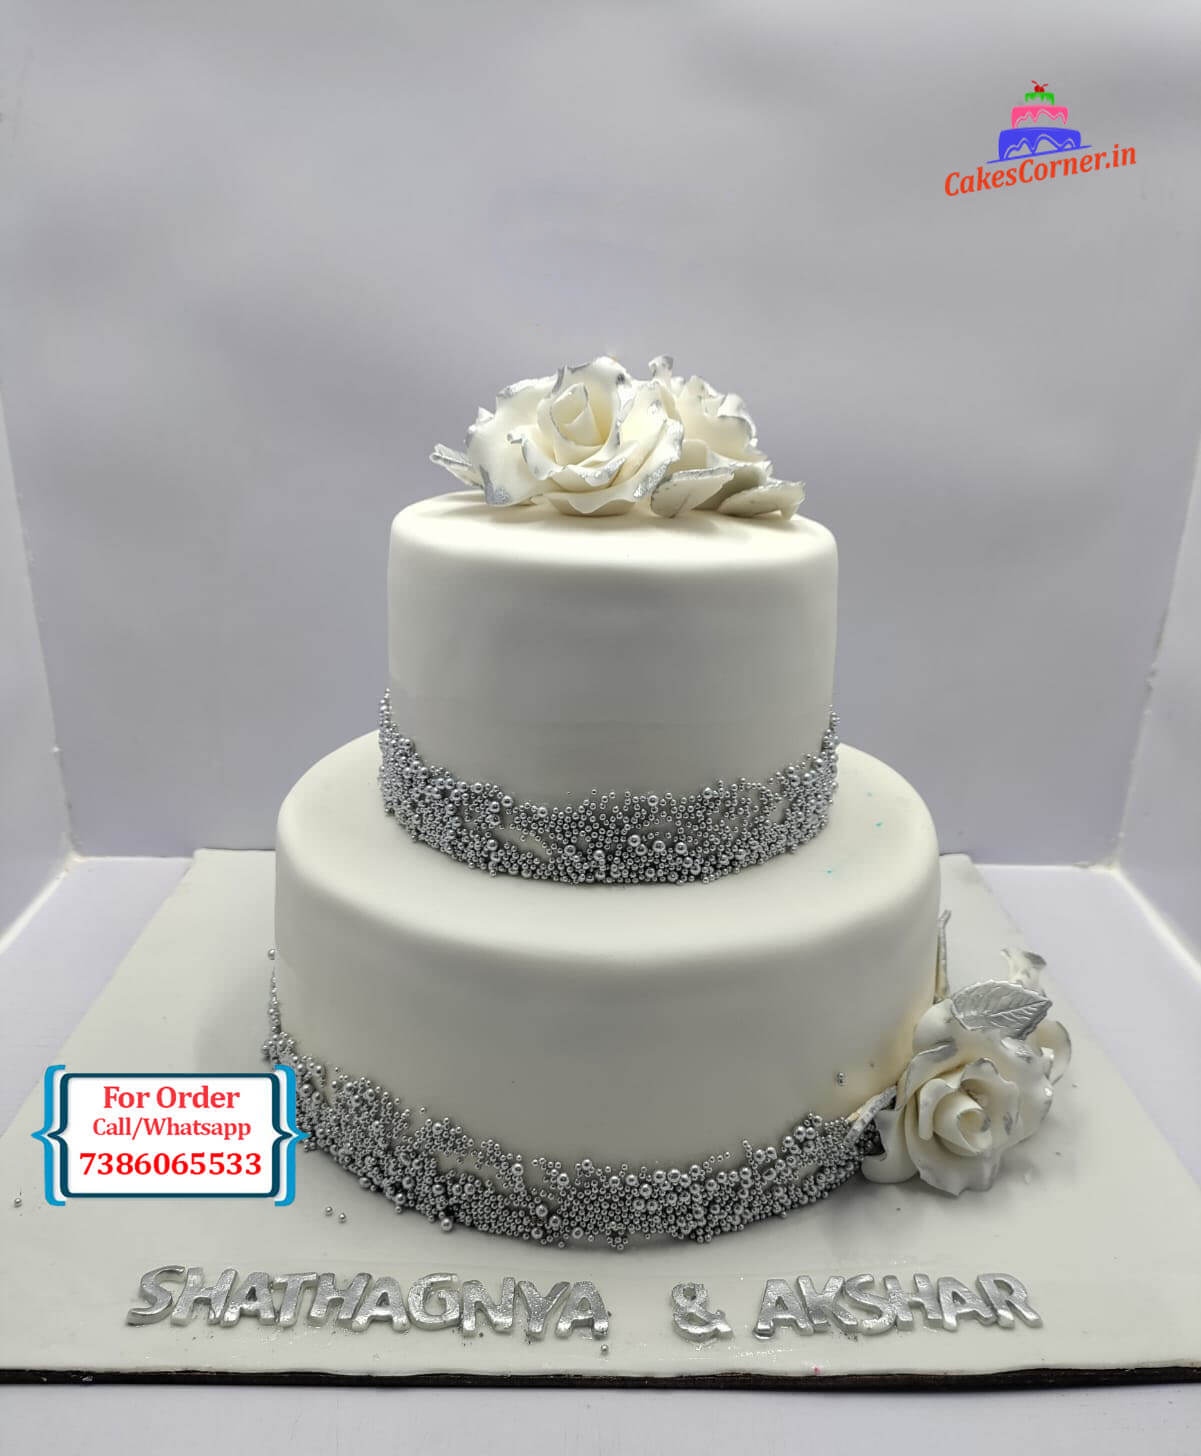 24 HOURS CAKE DELIVERY IN CHENNAI | V4 INTELLEKT MART | 24hrs cake shop in  chennai,